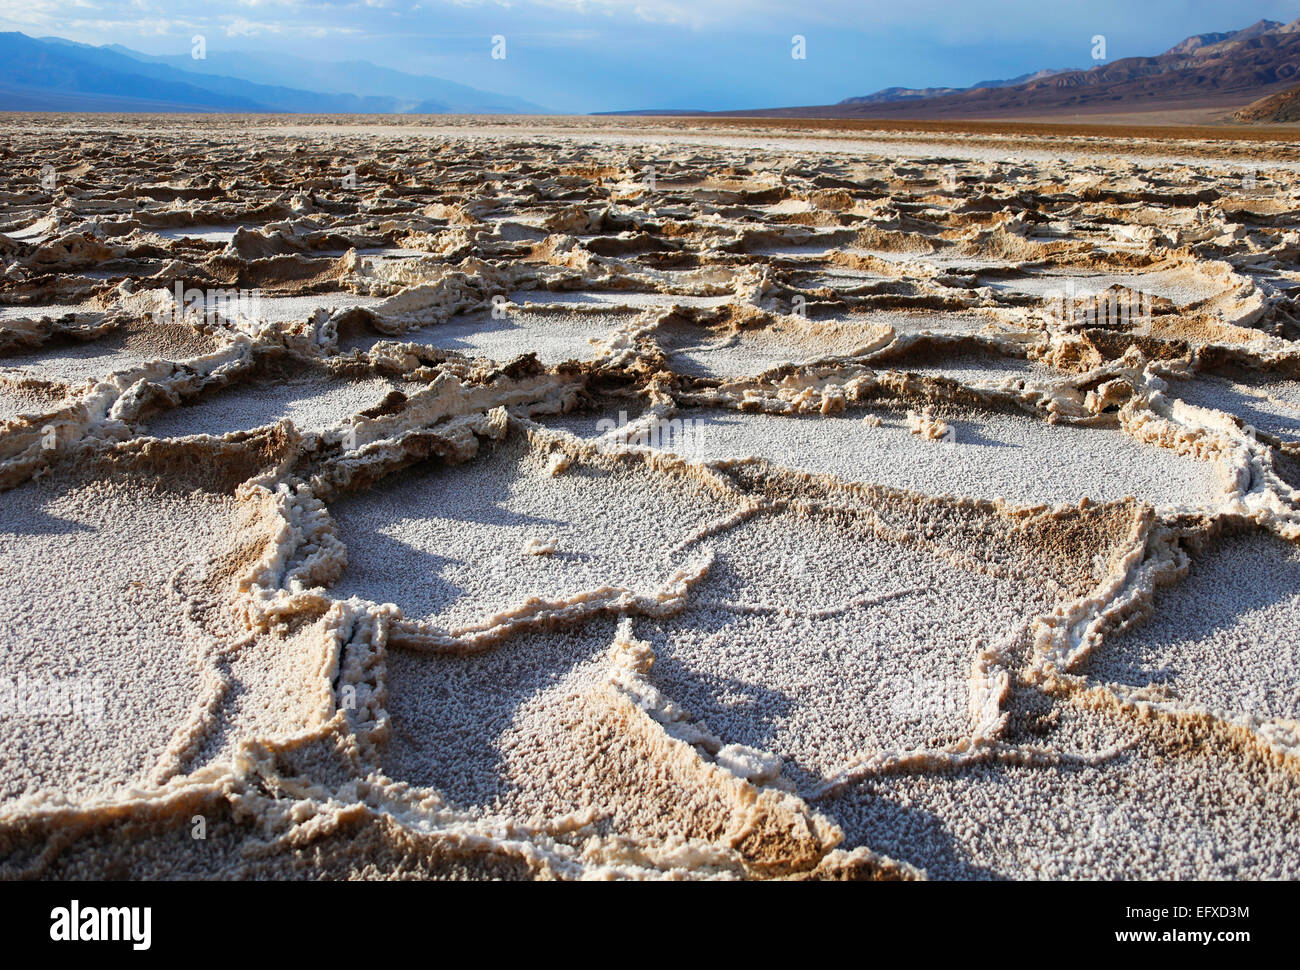 Salzkrusten, Salt Crust, Badwater Bassin, Tal des Todes, Death Valley, USA, United States of America Stock Photo